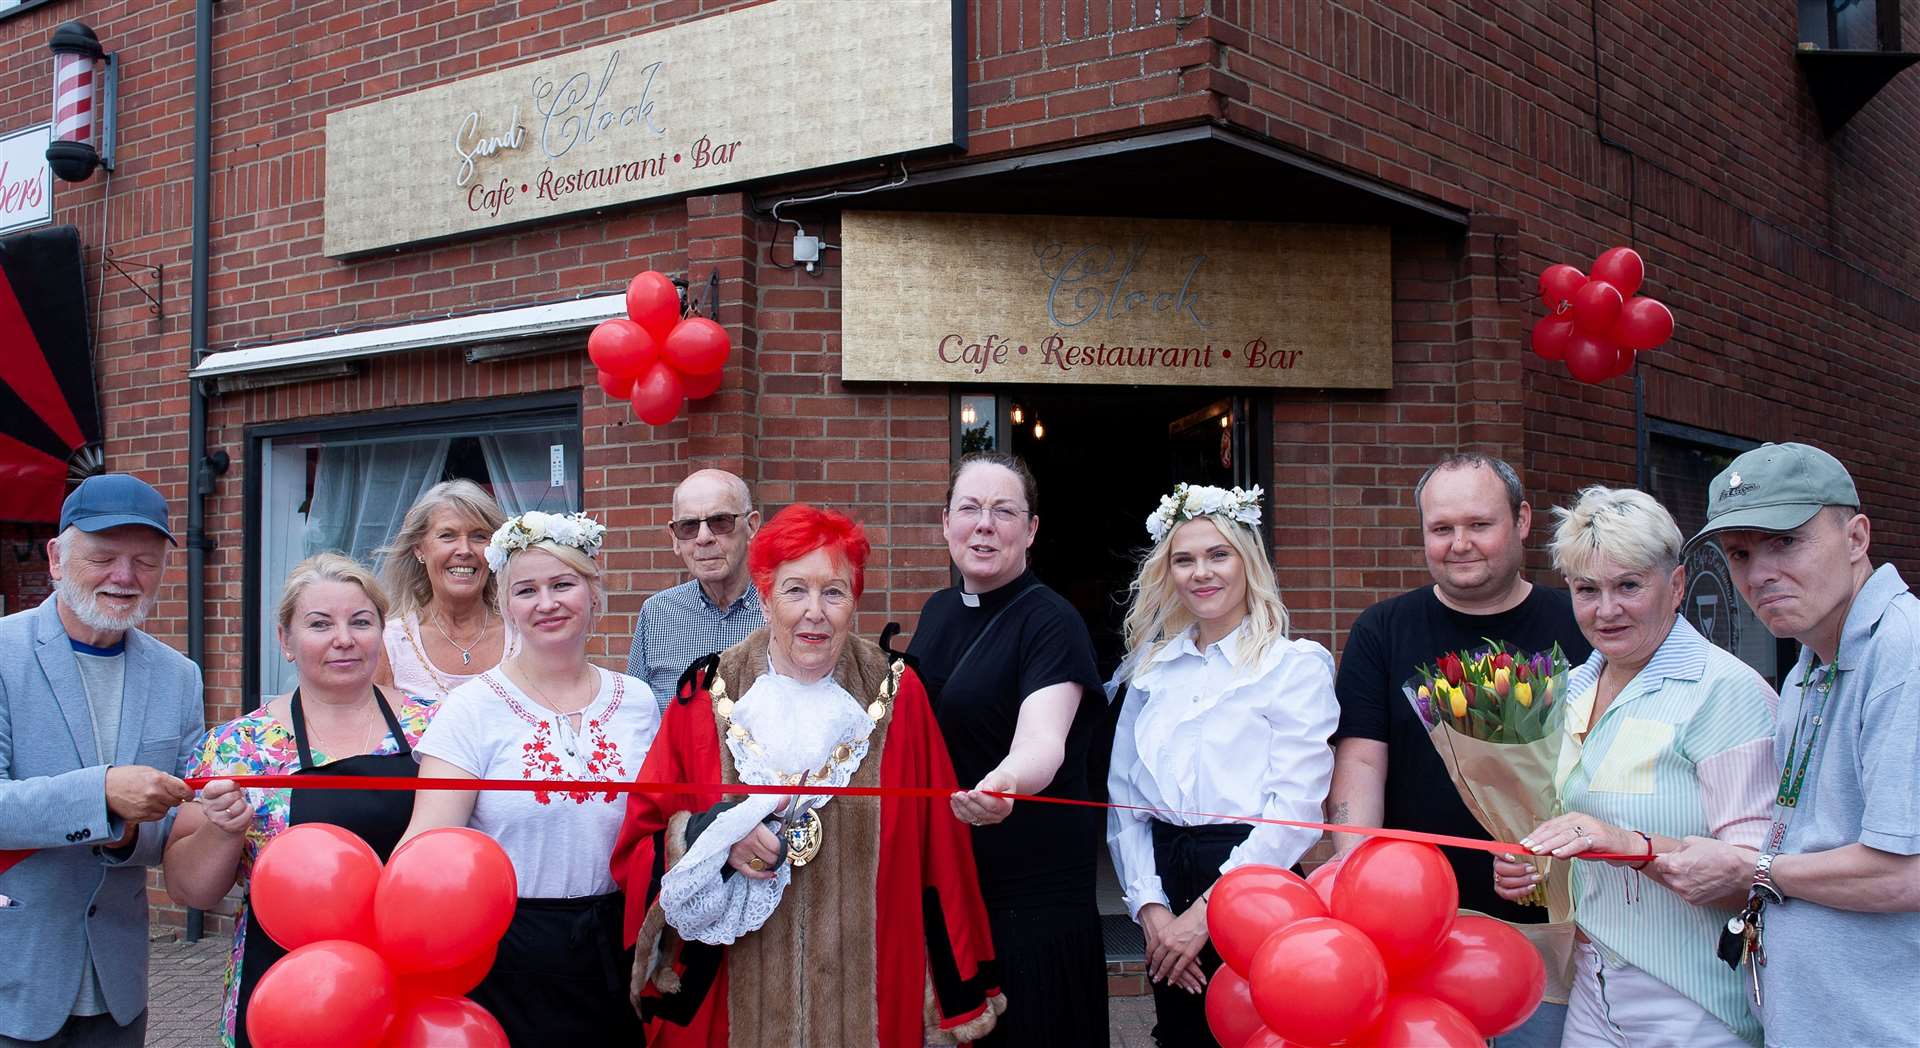 Borough mayor Margaret Wilkinson officially opens the Sand Clock Cafe and Restaurant Bar